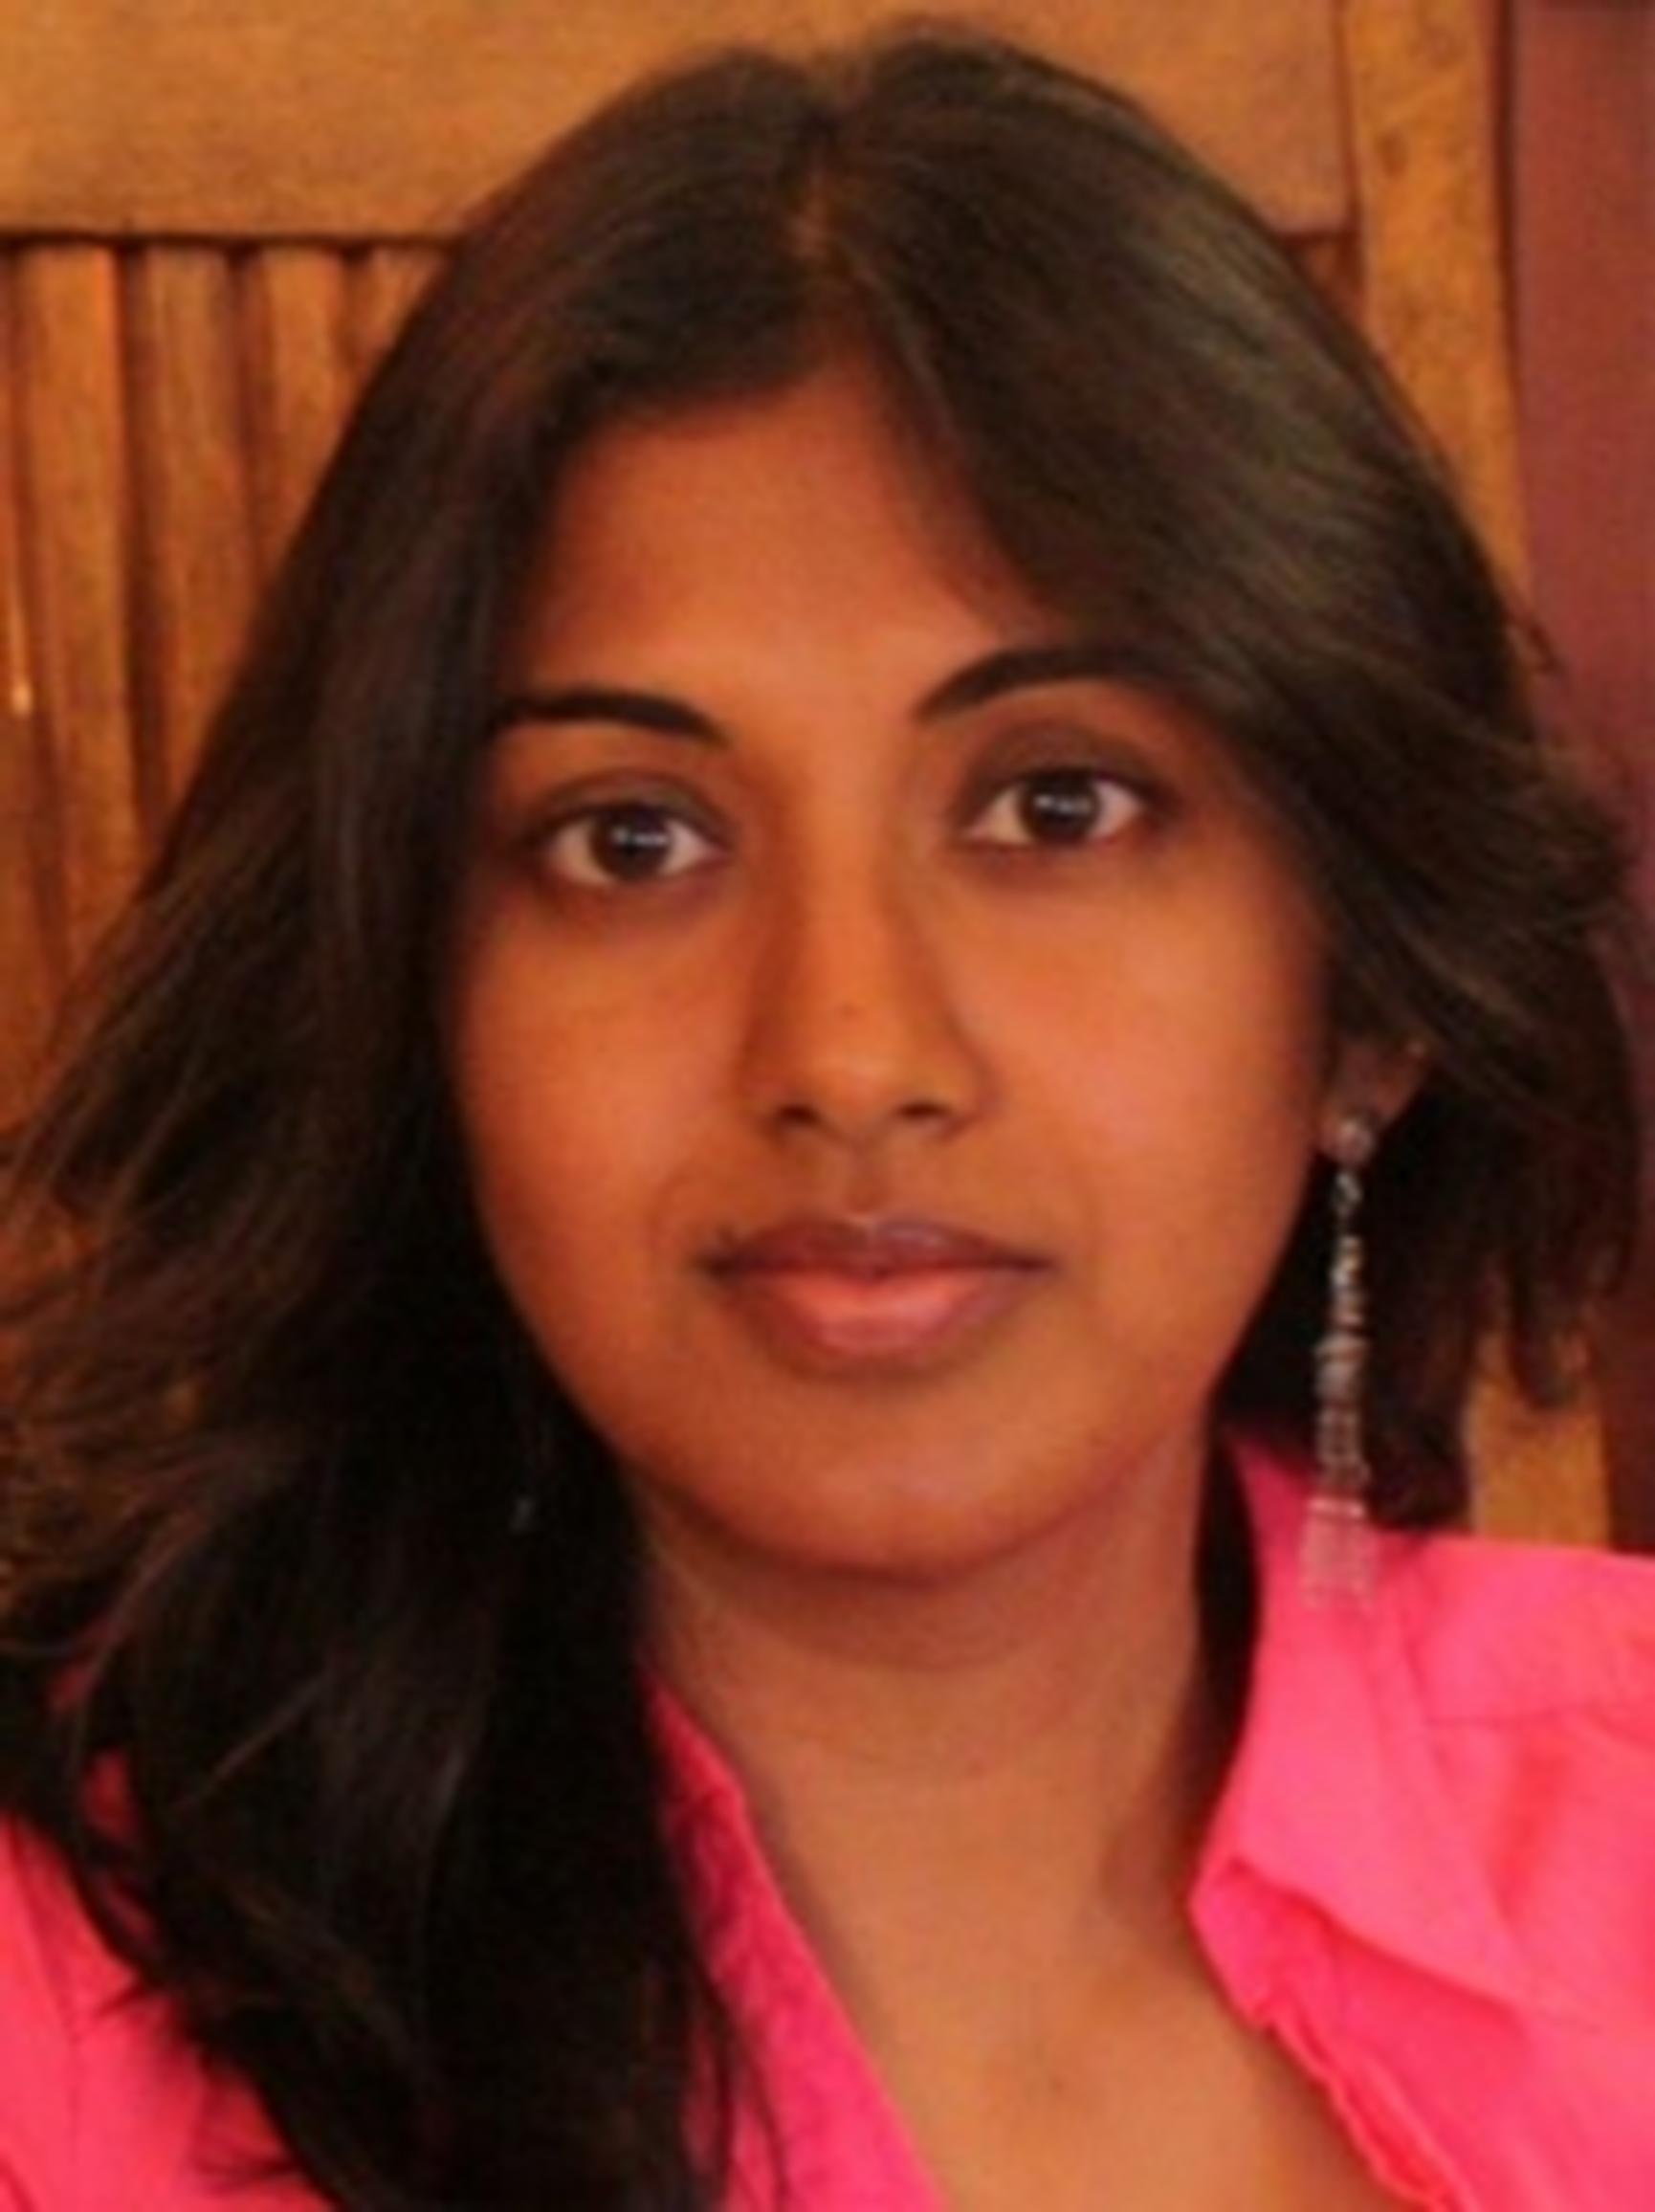 Panal Members: Aruna Sivakumar
Centre for Transport Studies and Director, Urban Systems Lab, Imperial College London